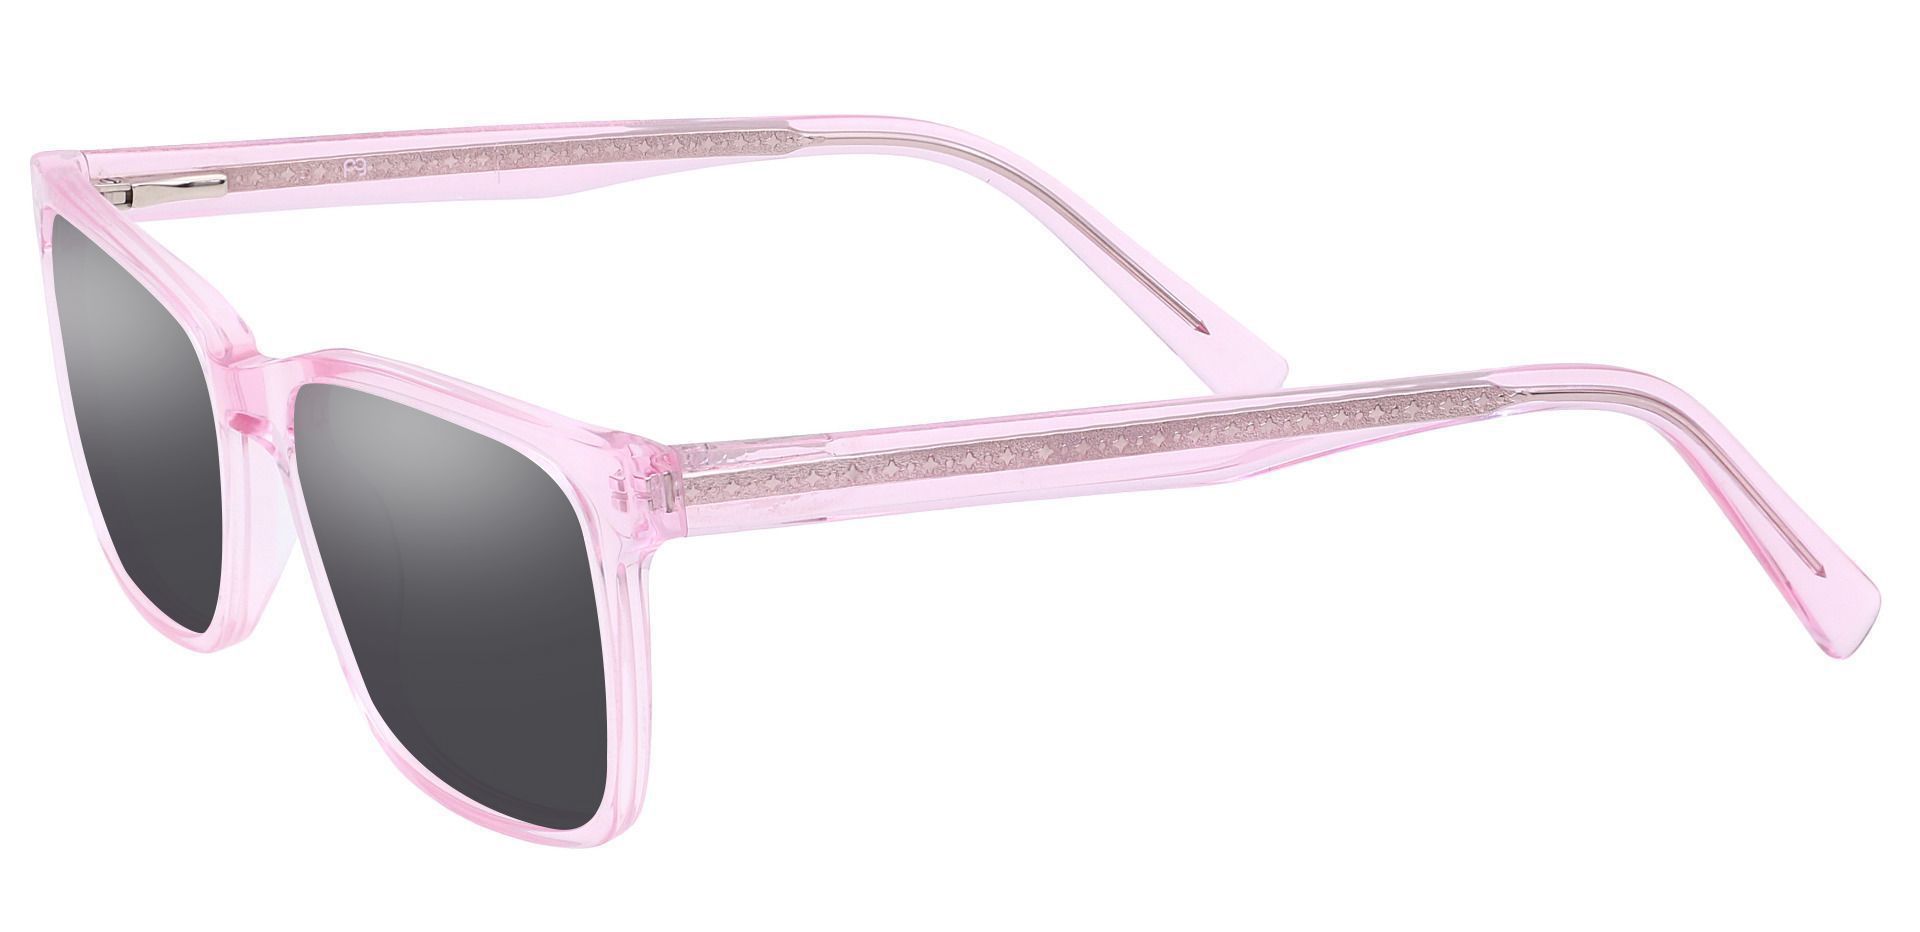 Galaxy Rectangle Lined Bifocal Sunglasses - Pink Frame With Gray Lenses